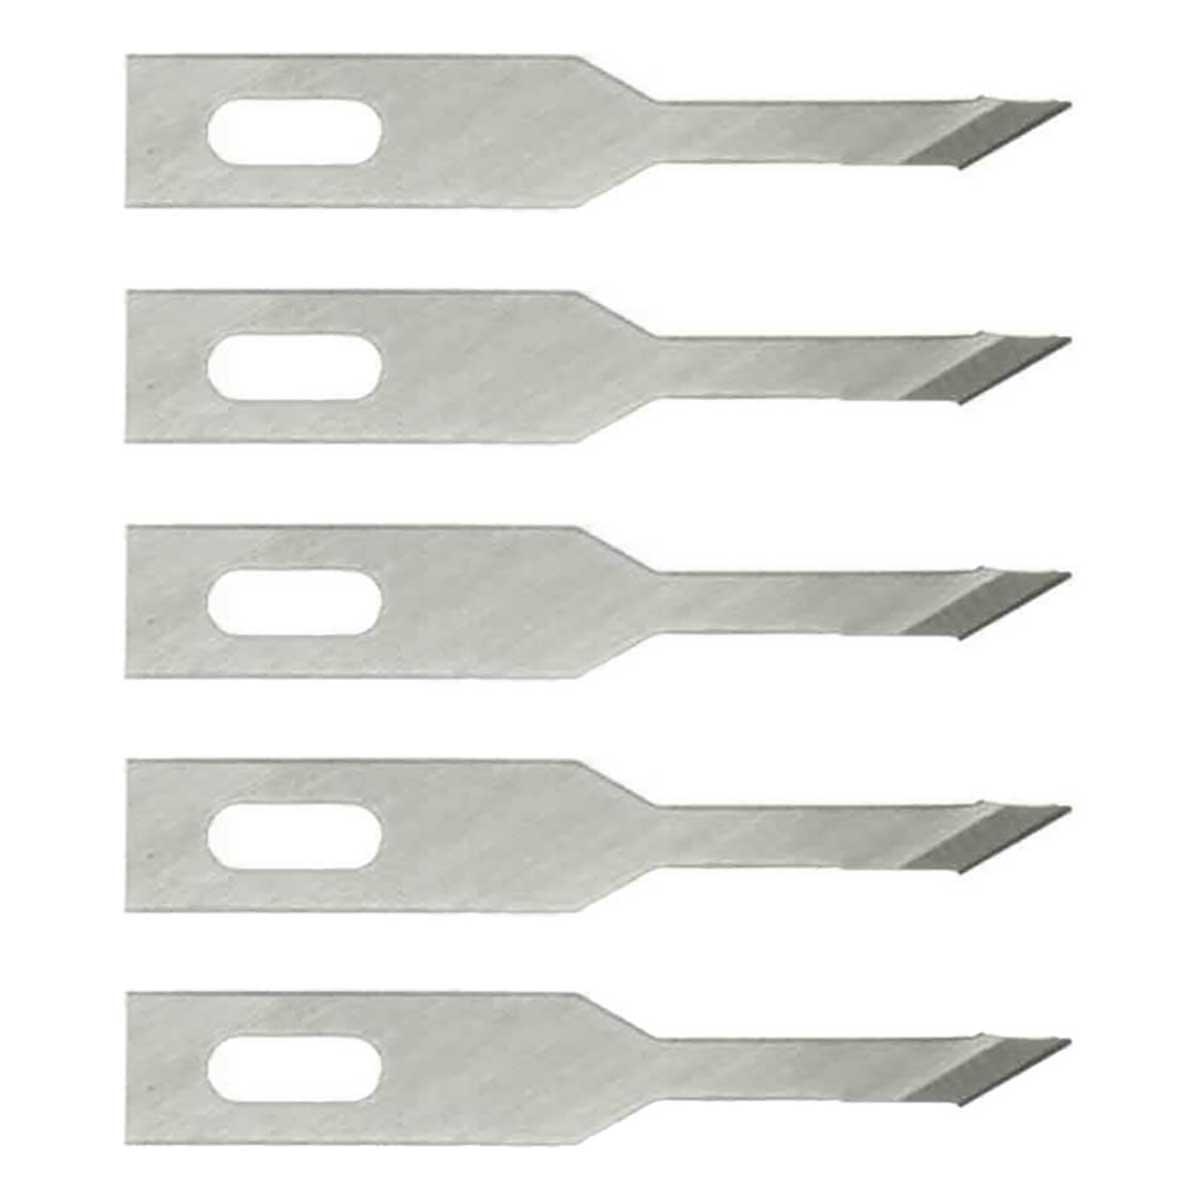 Excel #16 Stencil Edge Blade Pack of 5